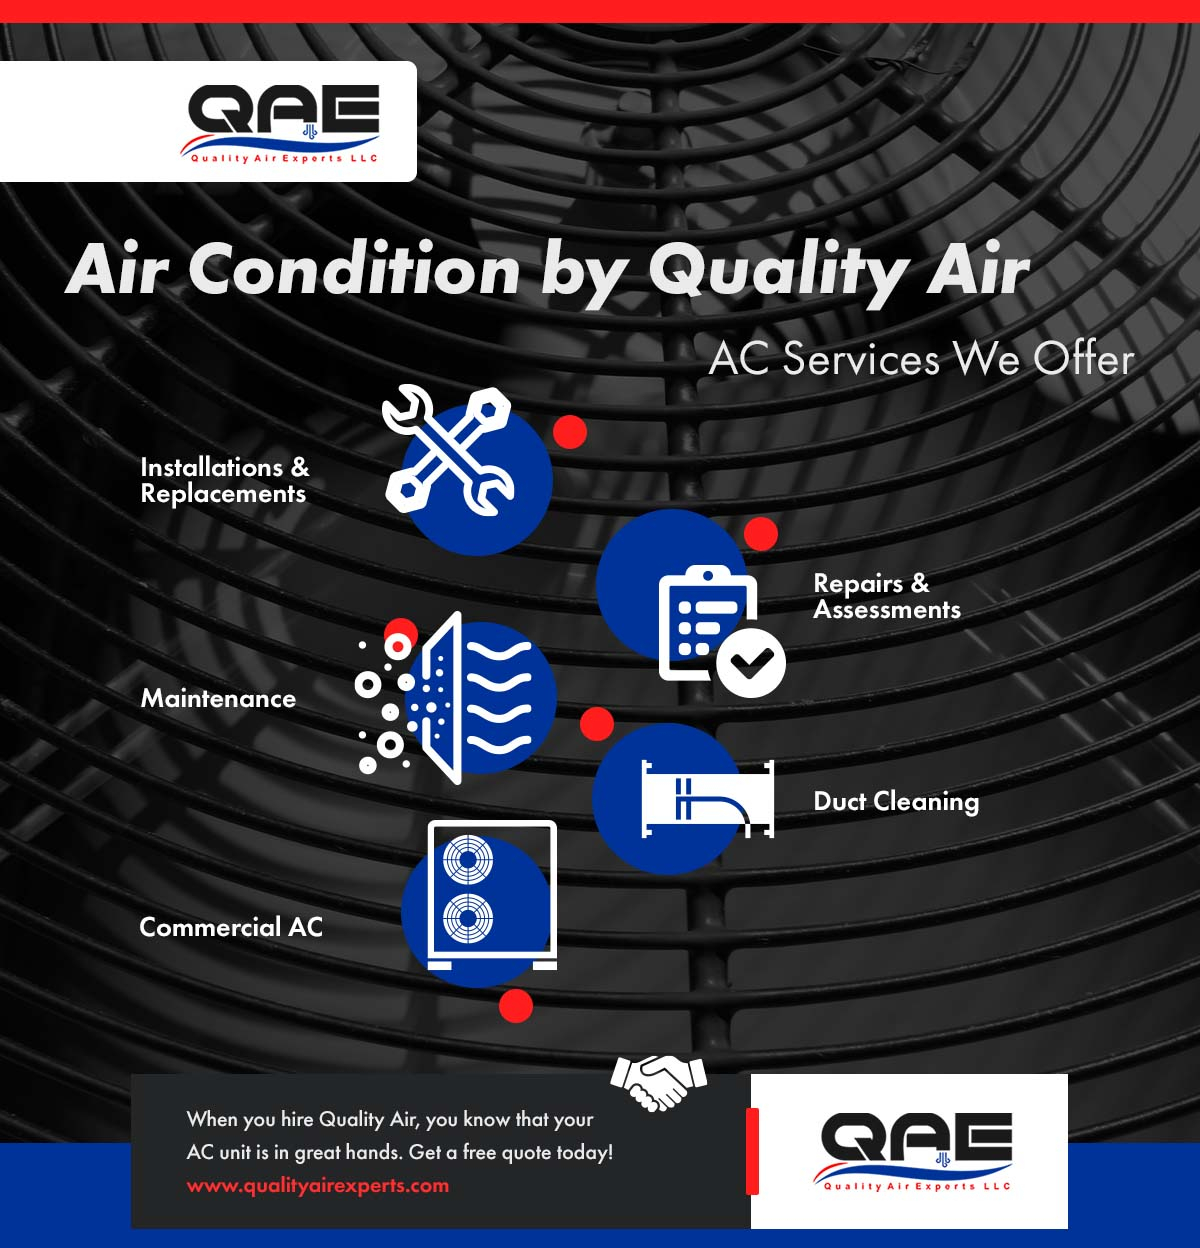 Air Condition by Quality Air_Infographic.jpg